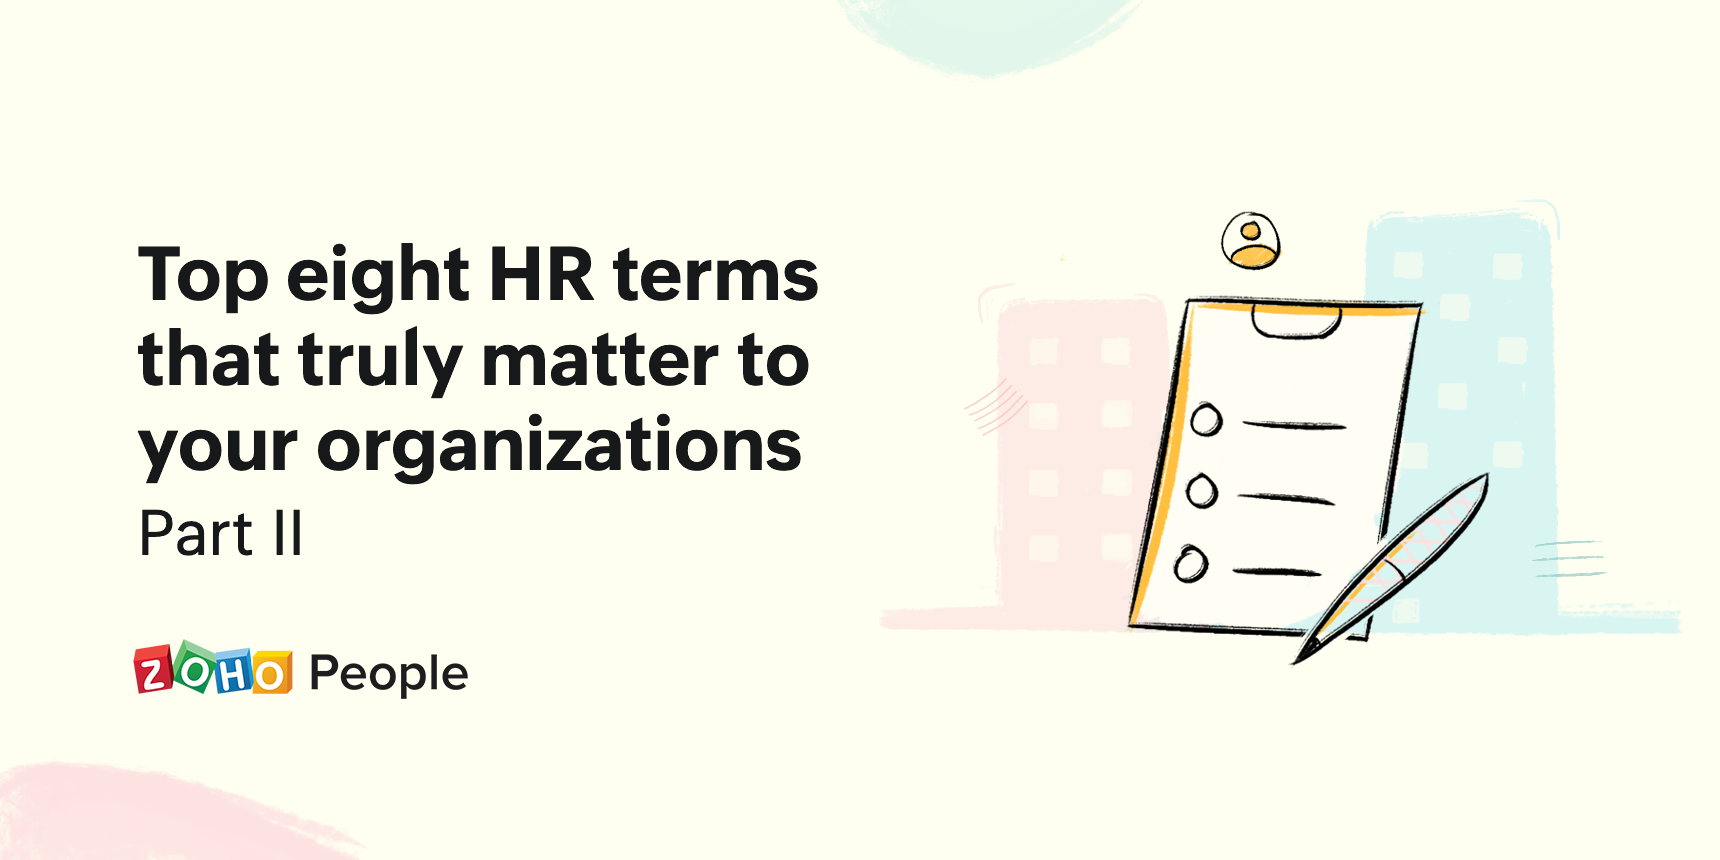 Top 8 HR terms that rule the HR industry